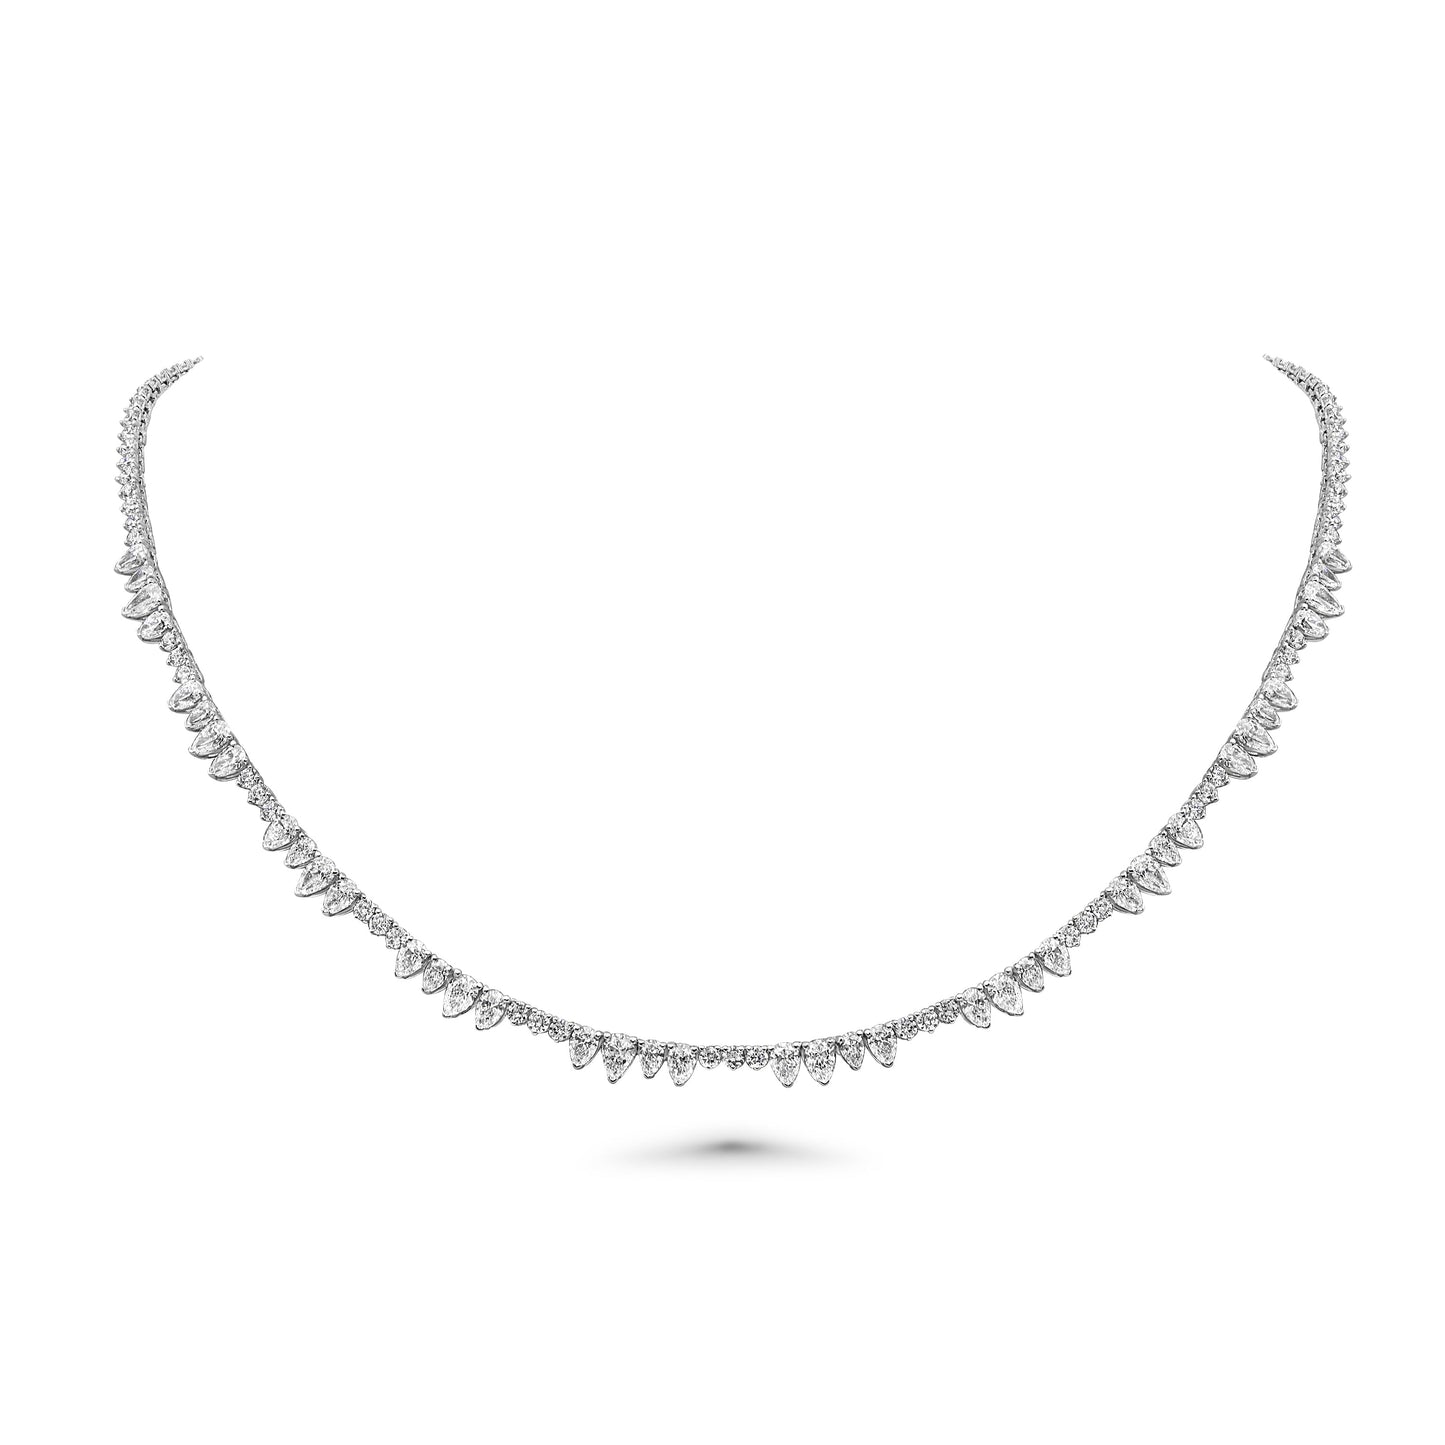 Pears & Rounds Diamond Tennis Necklace